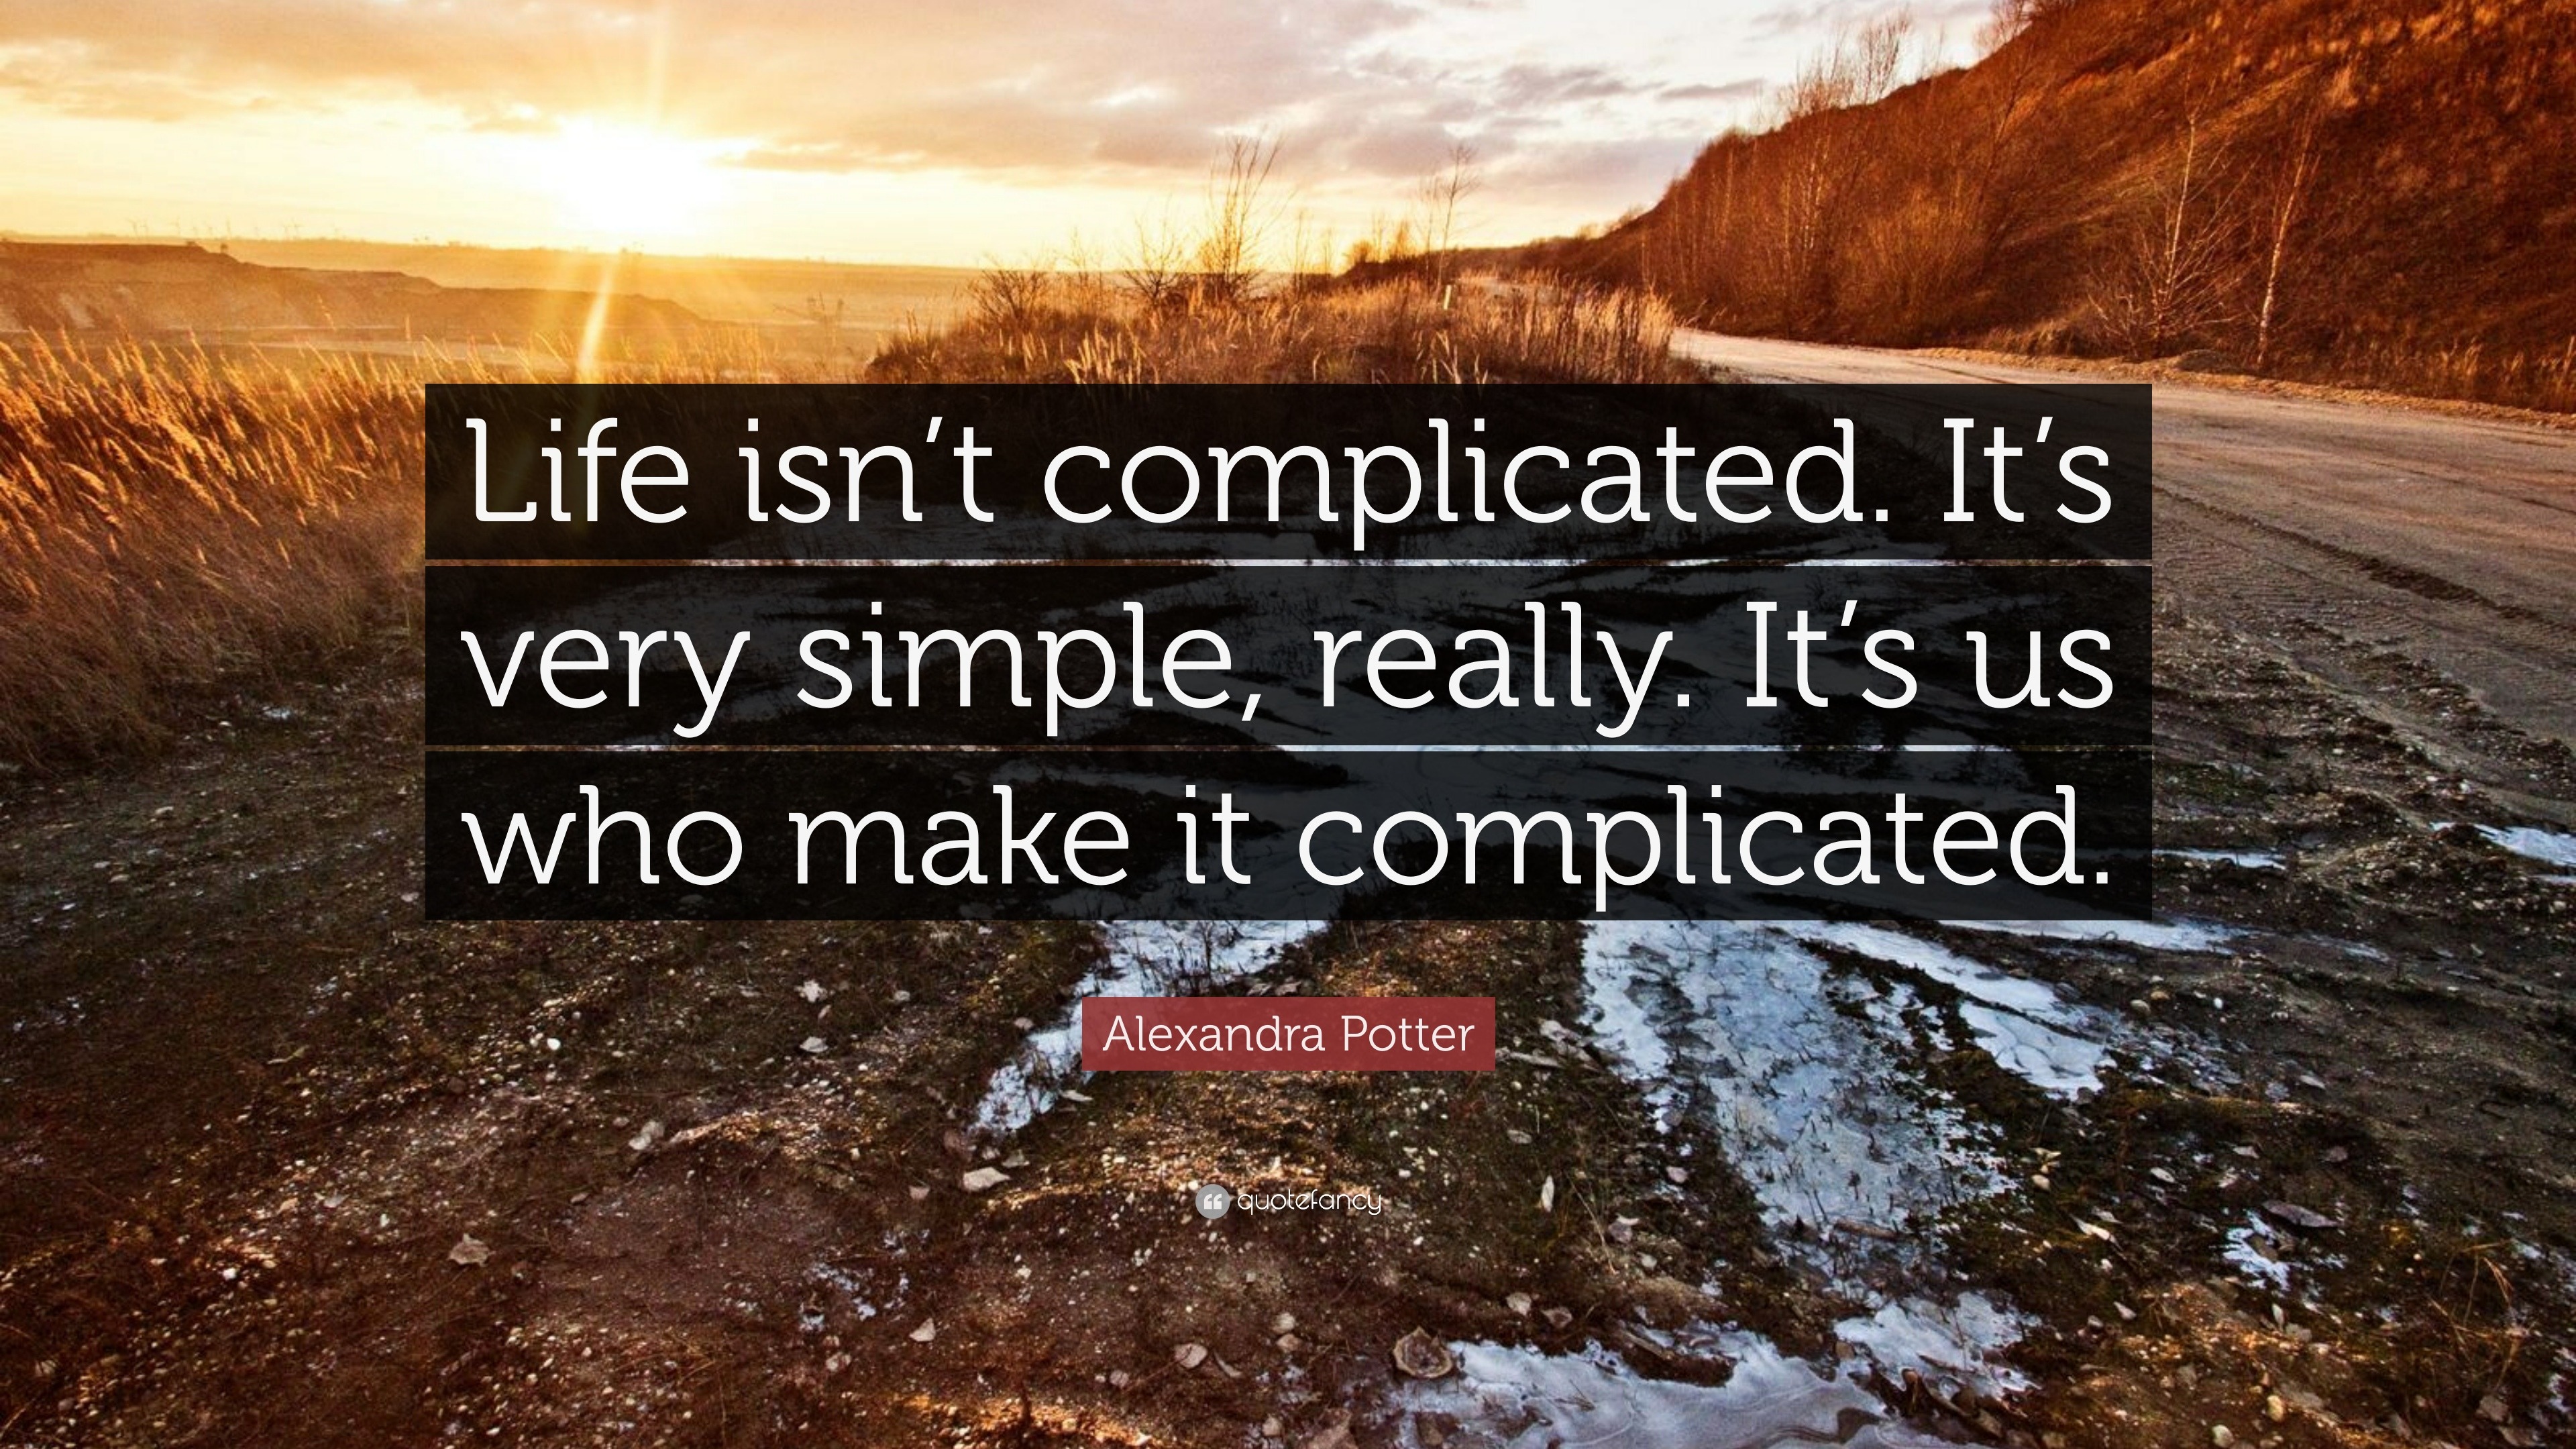 Alexandra Potter Quote “Life isn t plicated It s very simple really